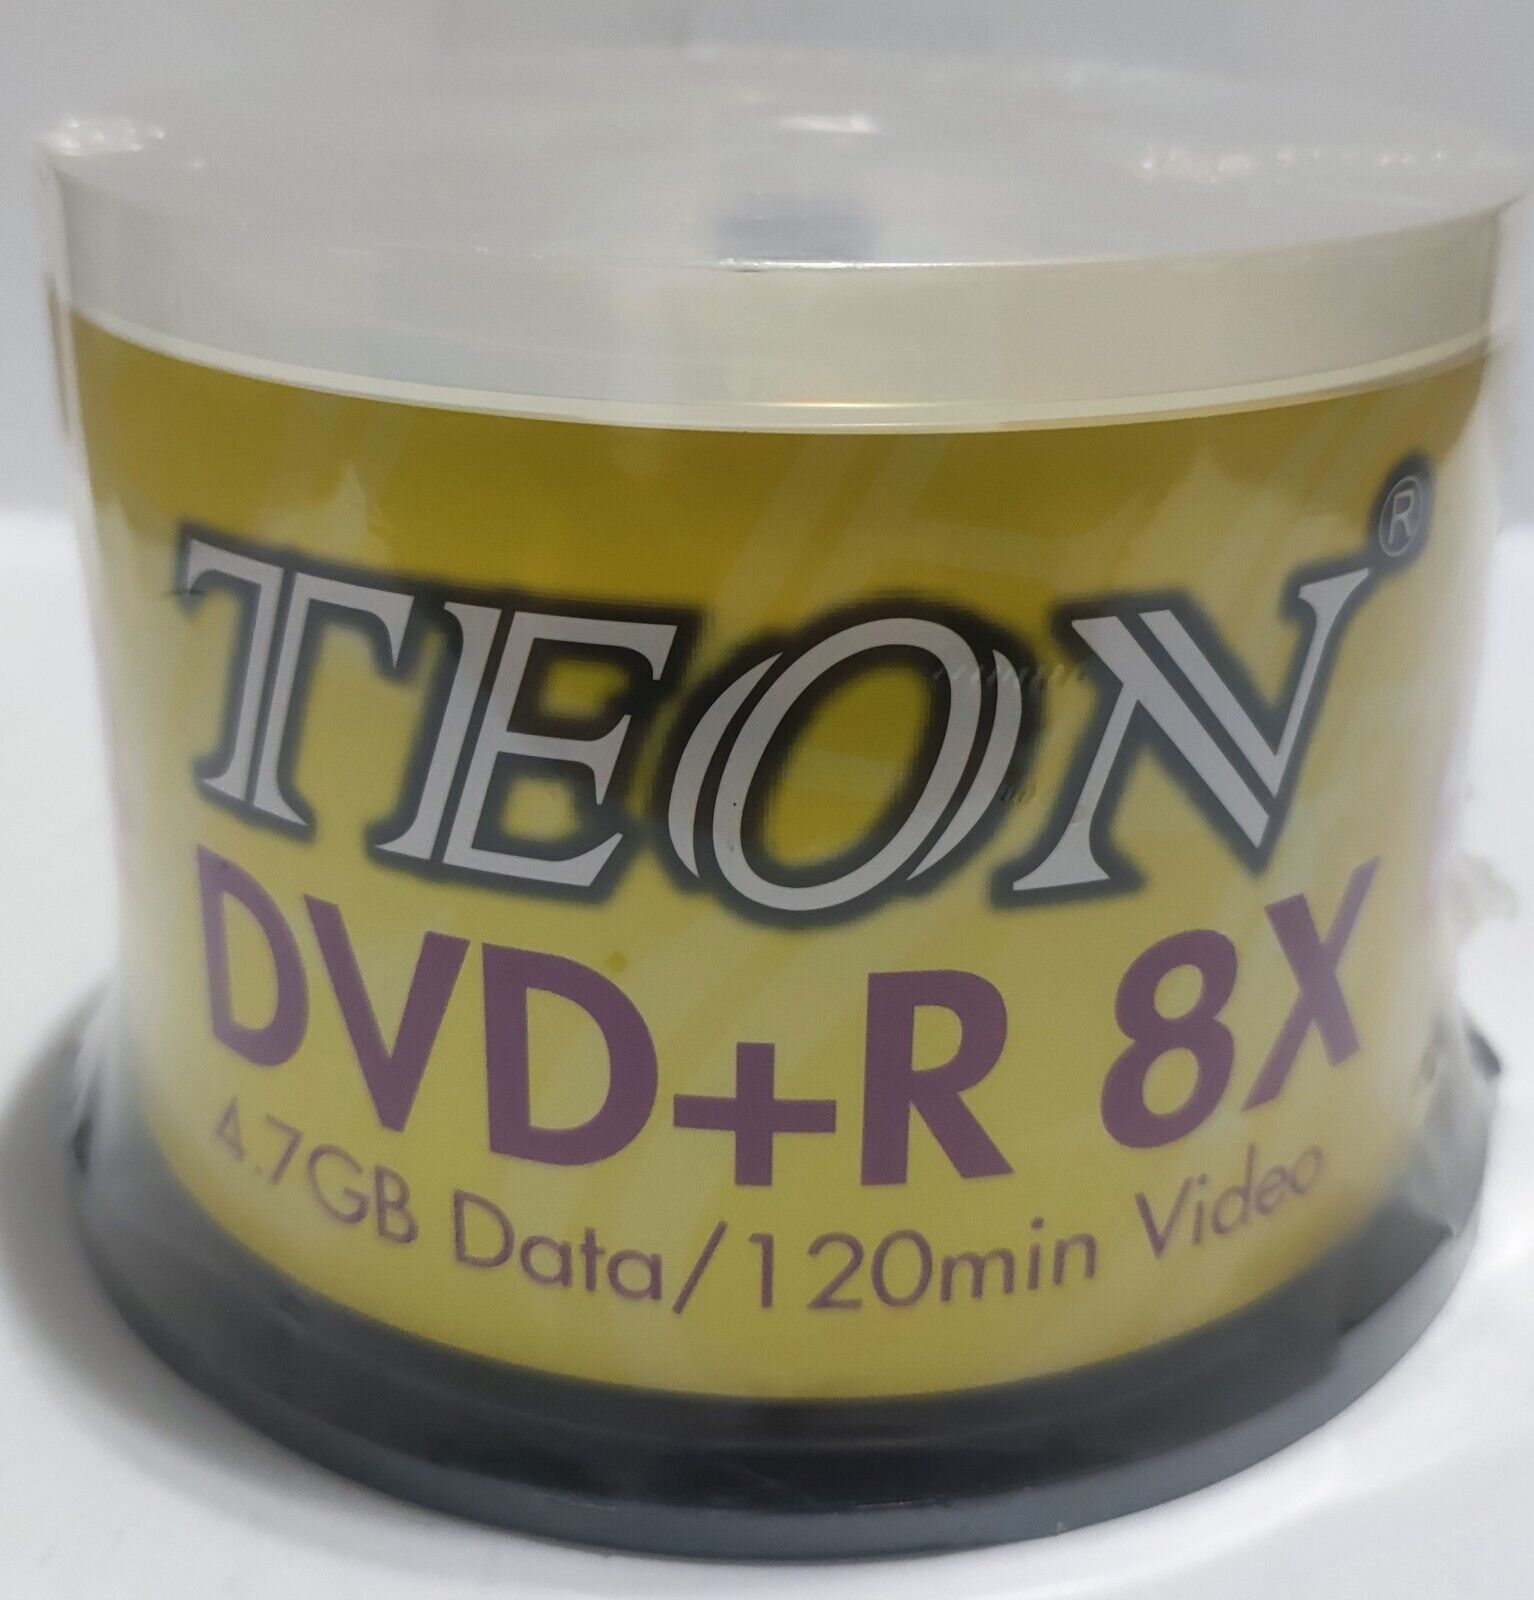 NEW TEON DYNEX DVD+R 8X 4.7GB 120MIN 40 PACK SPINDLE DVD WRITABLE DISCS